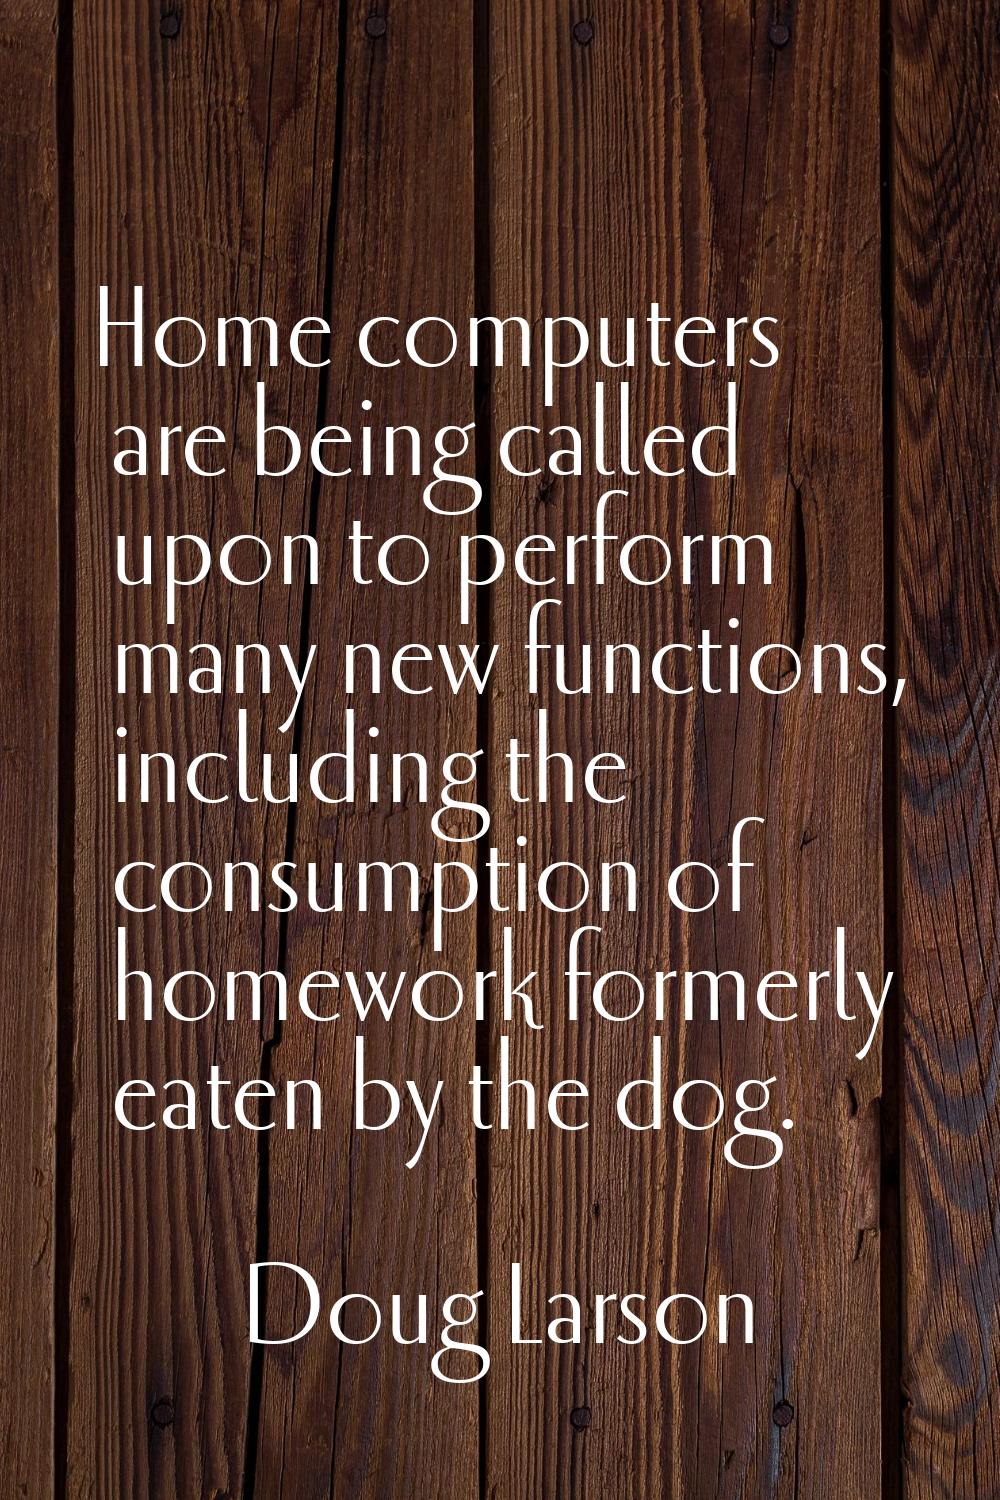 Home computers are being called upon to perform many new functions, including the consumption of ho